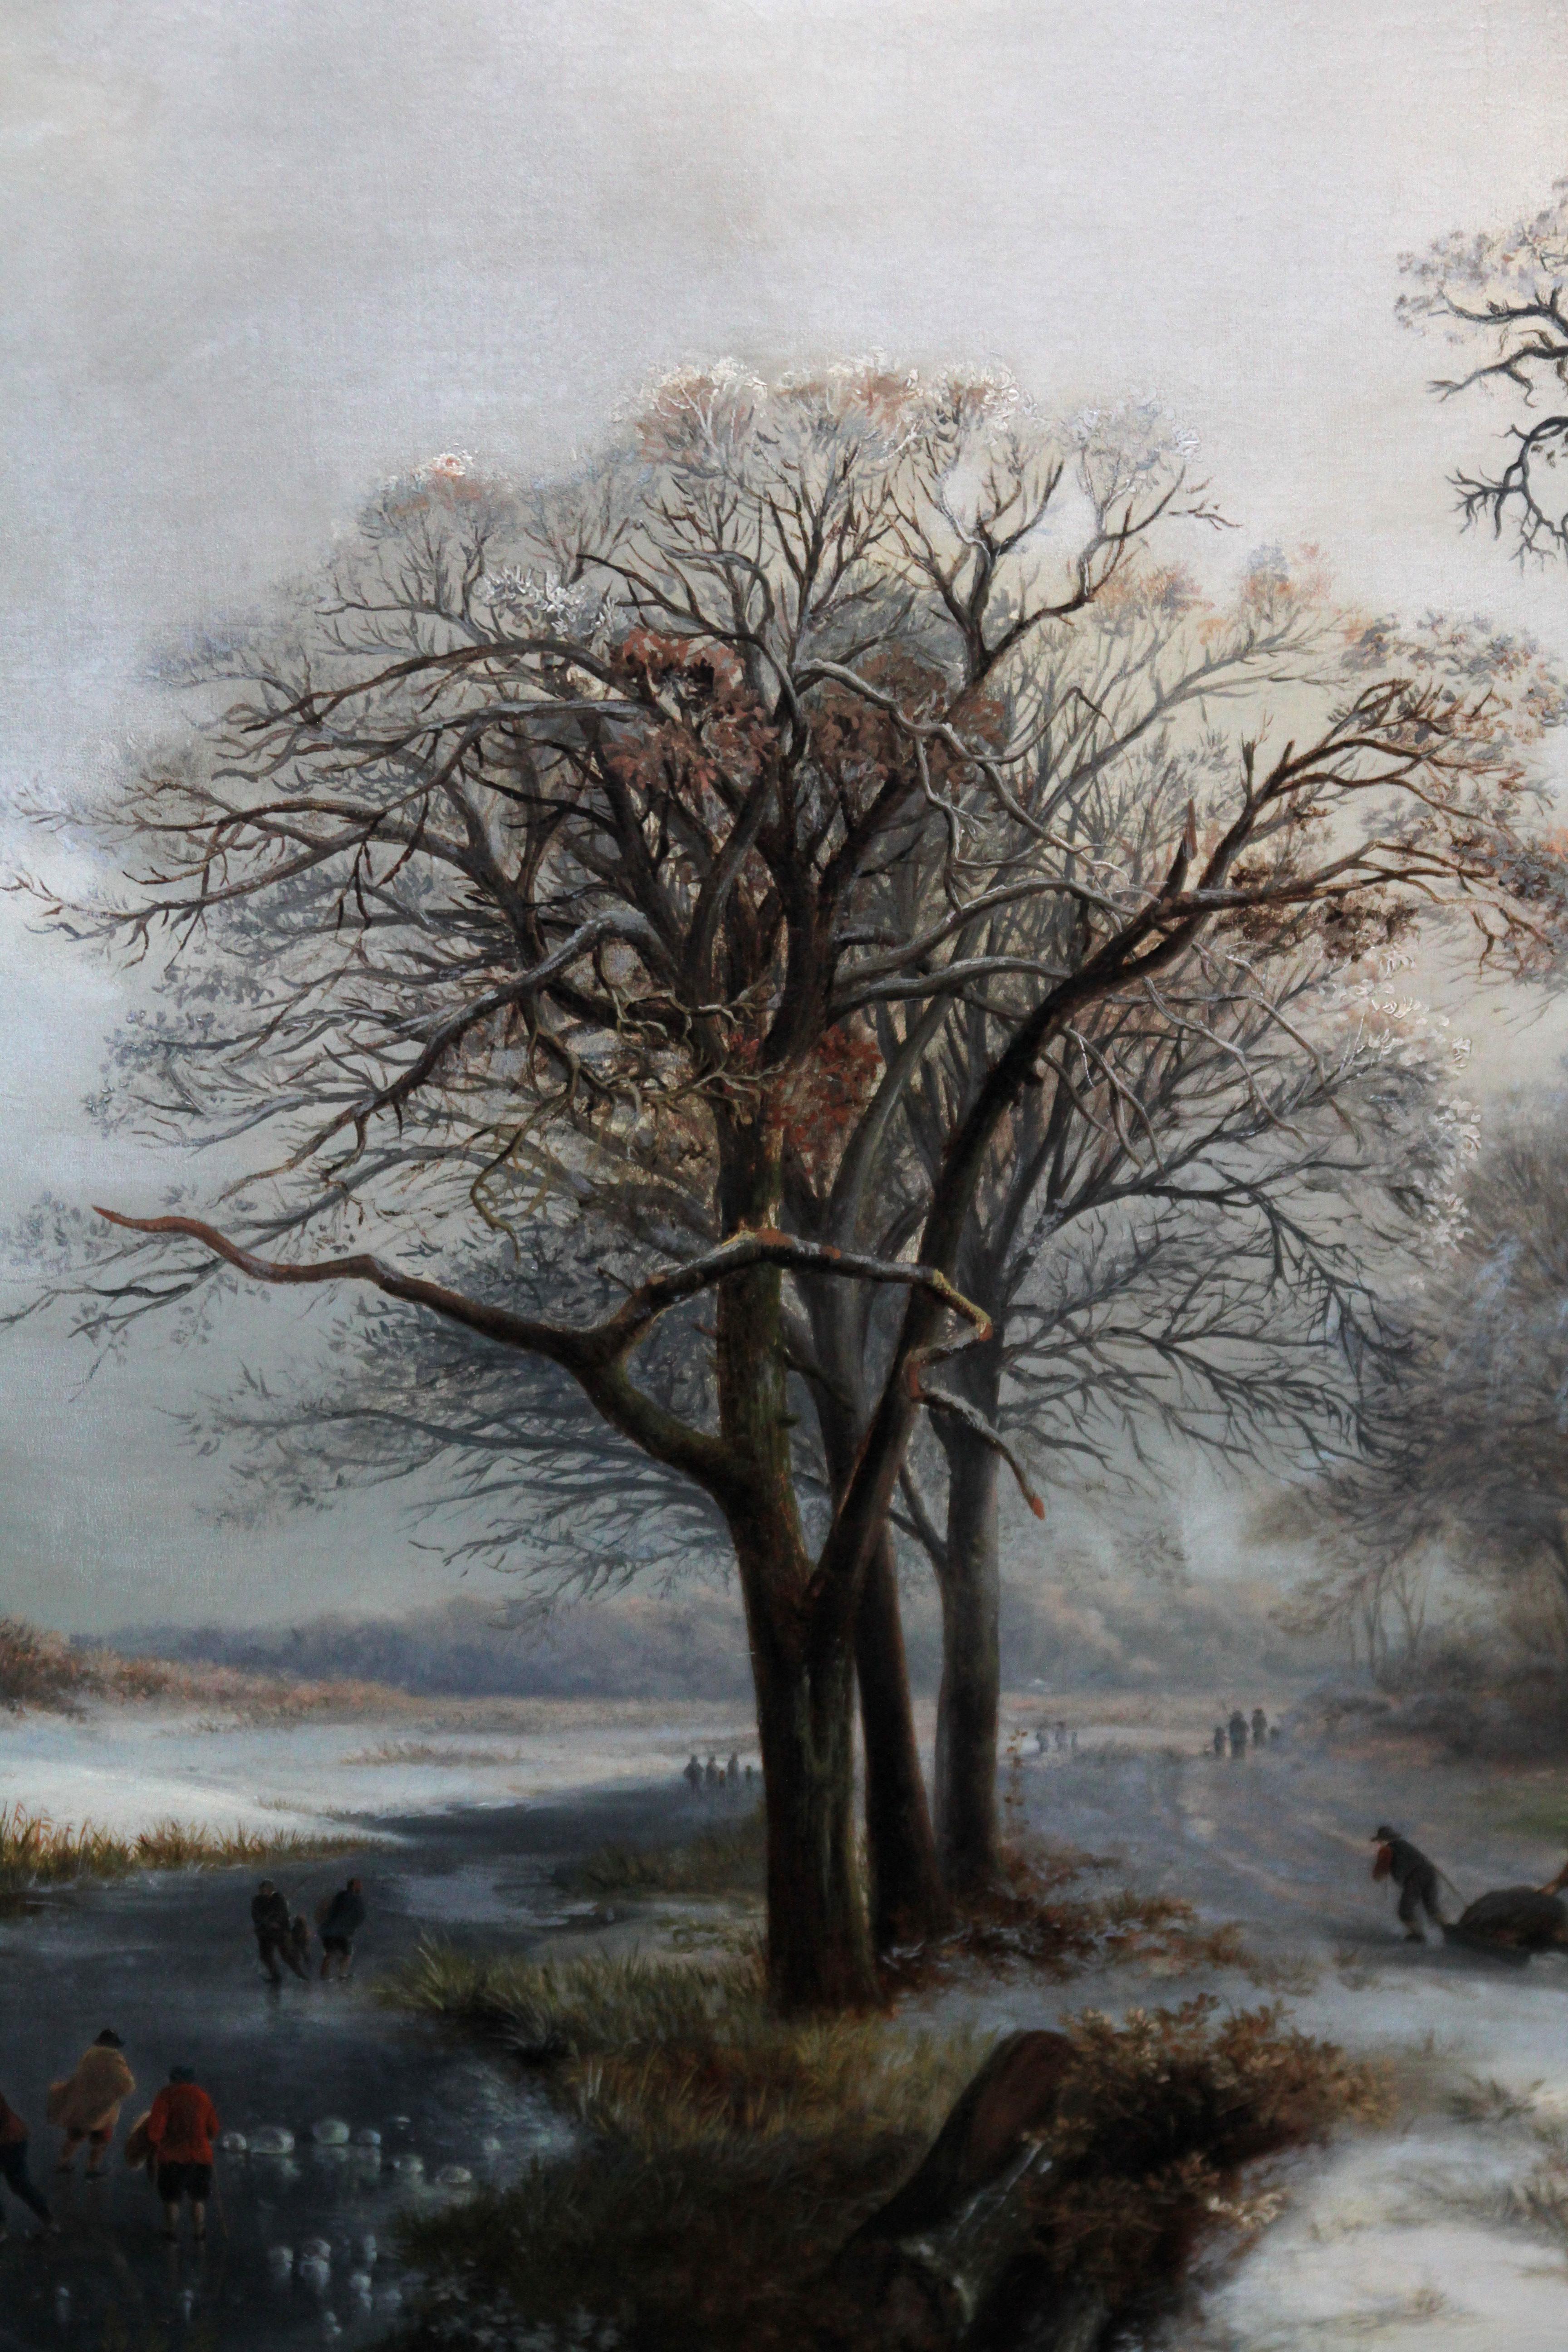 This charming Dutch Romantic Golden Age picturesque winter landscape oil painting is by Everardus Benedictus Gregorius Pagano Mirani. It was painted in 1848 and is signed and dated lower right. The composition is a lovely bright snow scene of a